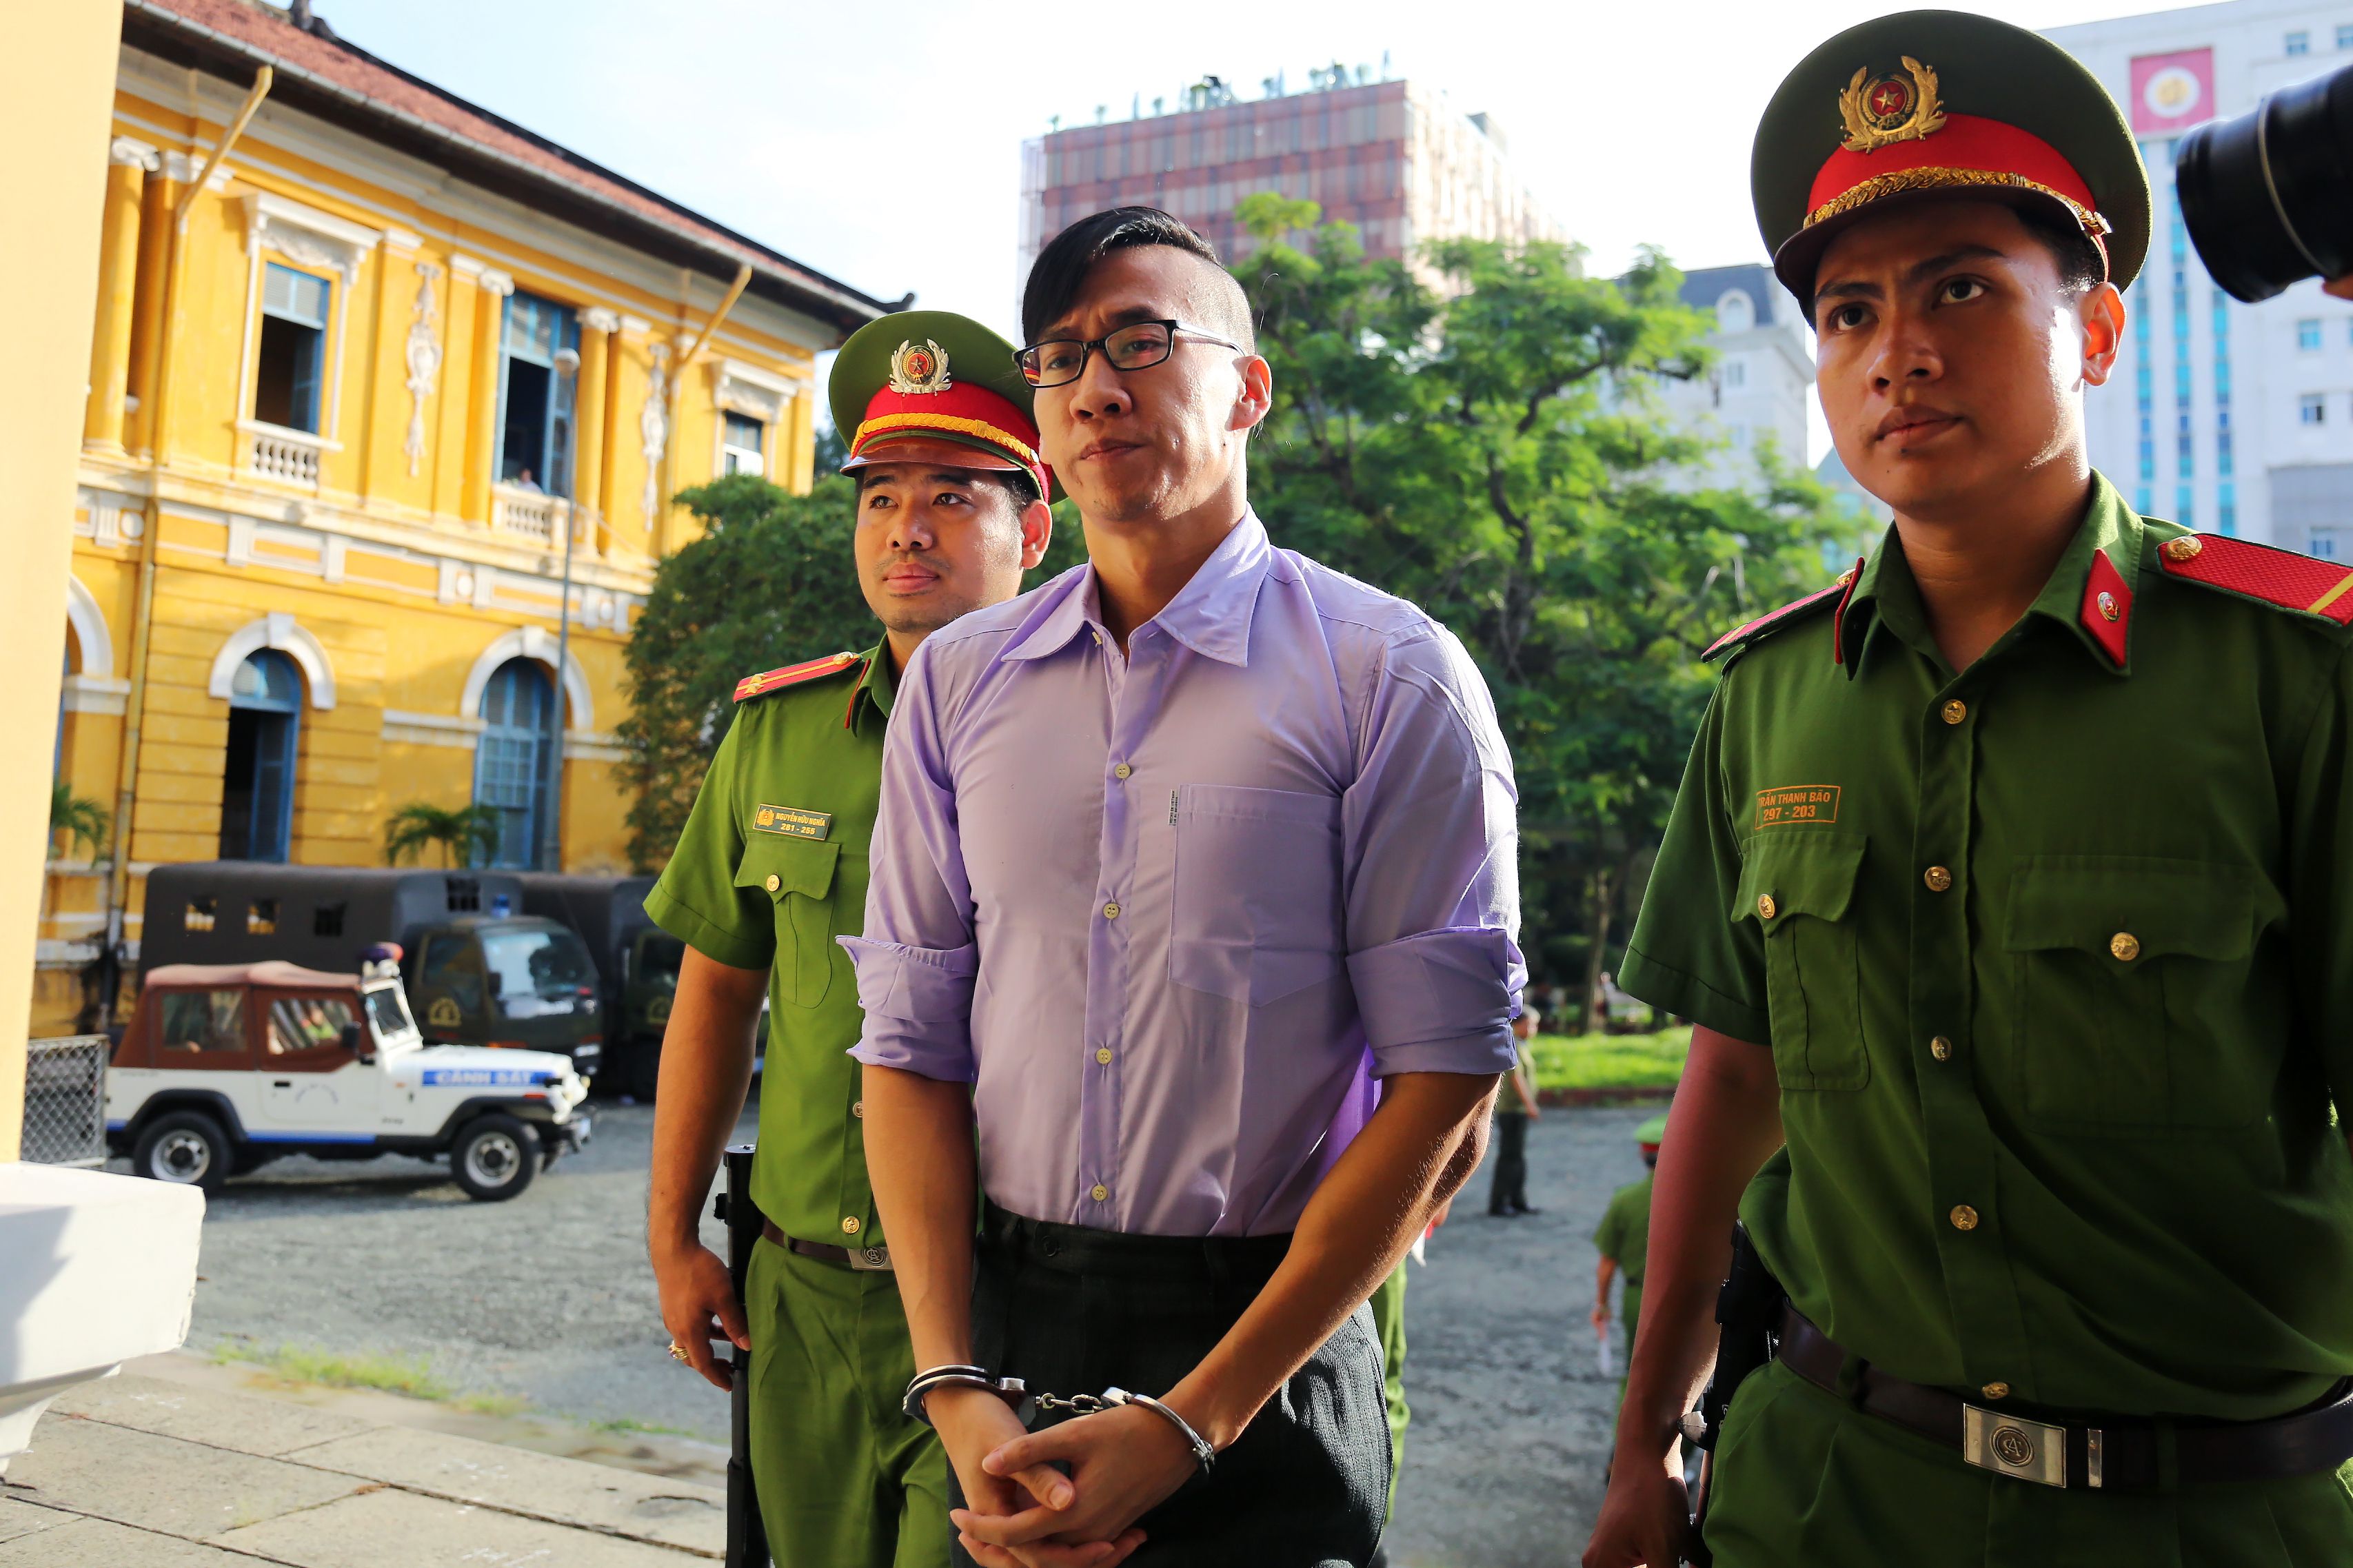 American-Vietnamese citizen William Nguyen is escorted by policemen to a courtroom for his trial in Ho Chi Minh City on July 20, 2018. (AFP—Getty Images)